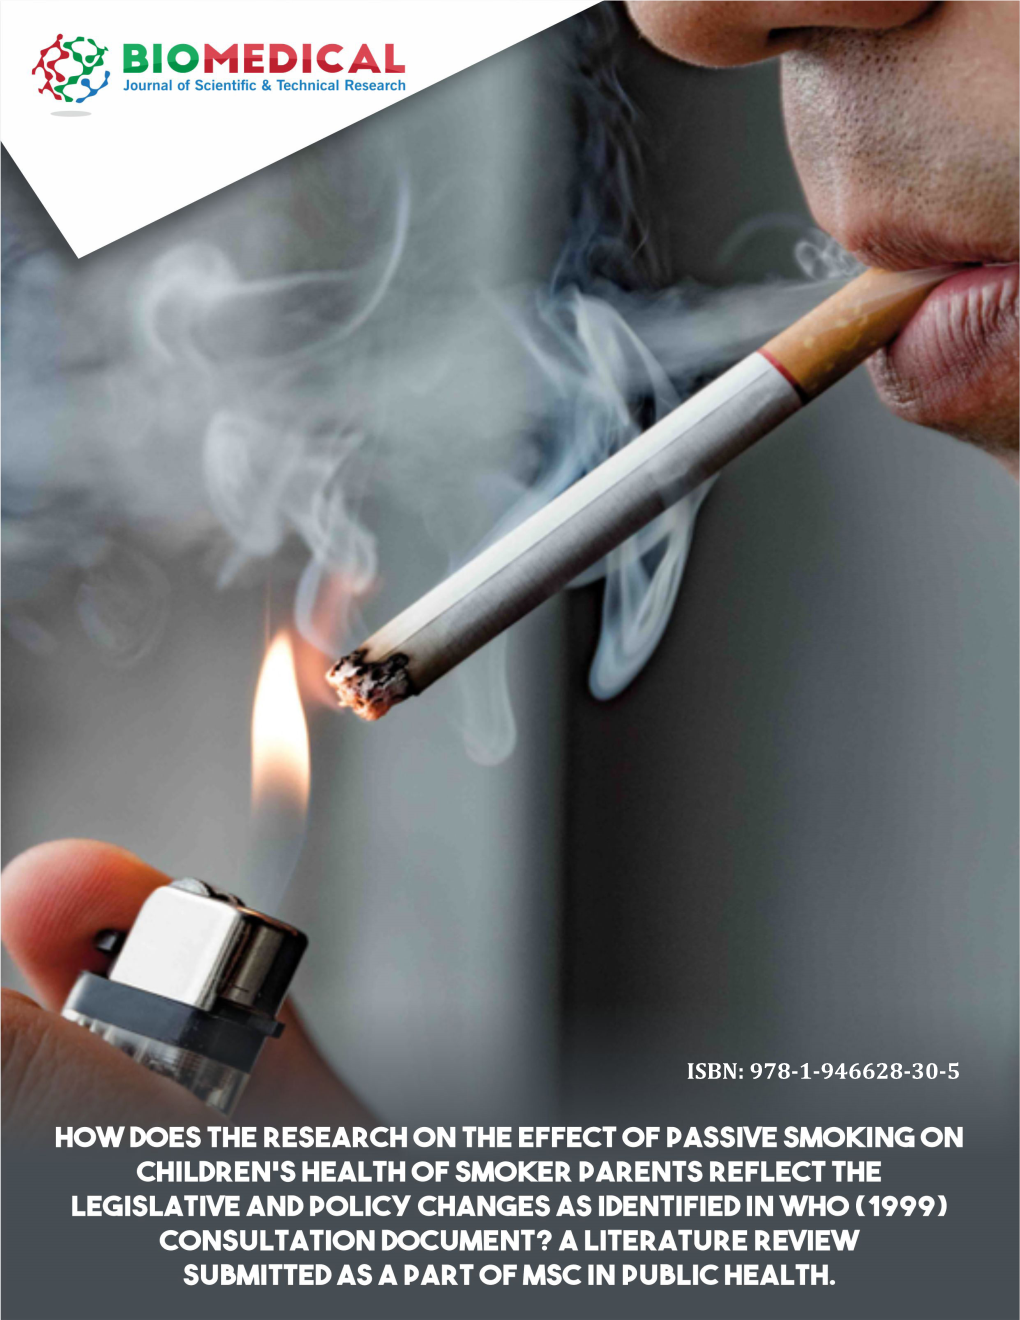 How Does the Research on the Effect of Passive Smoking on Children's